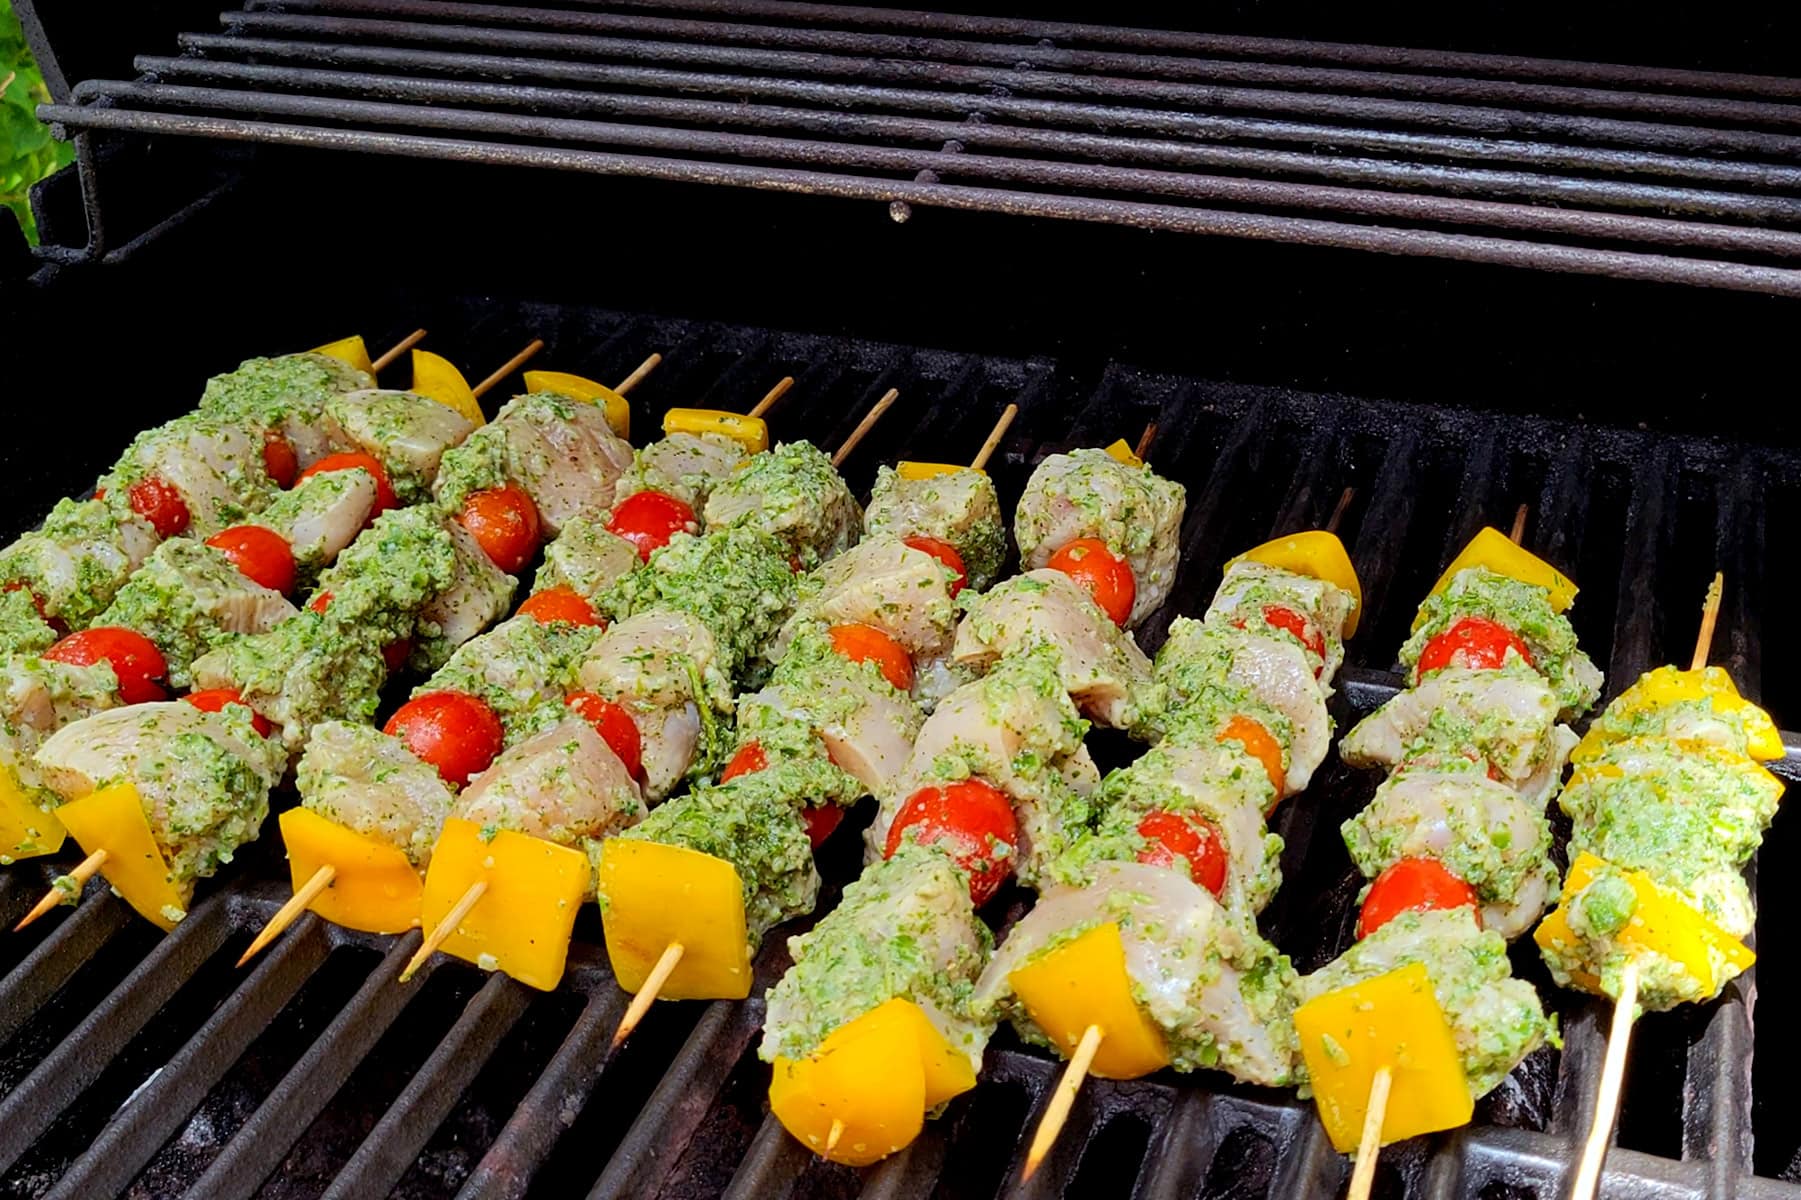 Chicken pinchos on the grill.